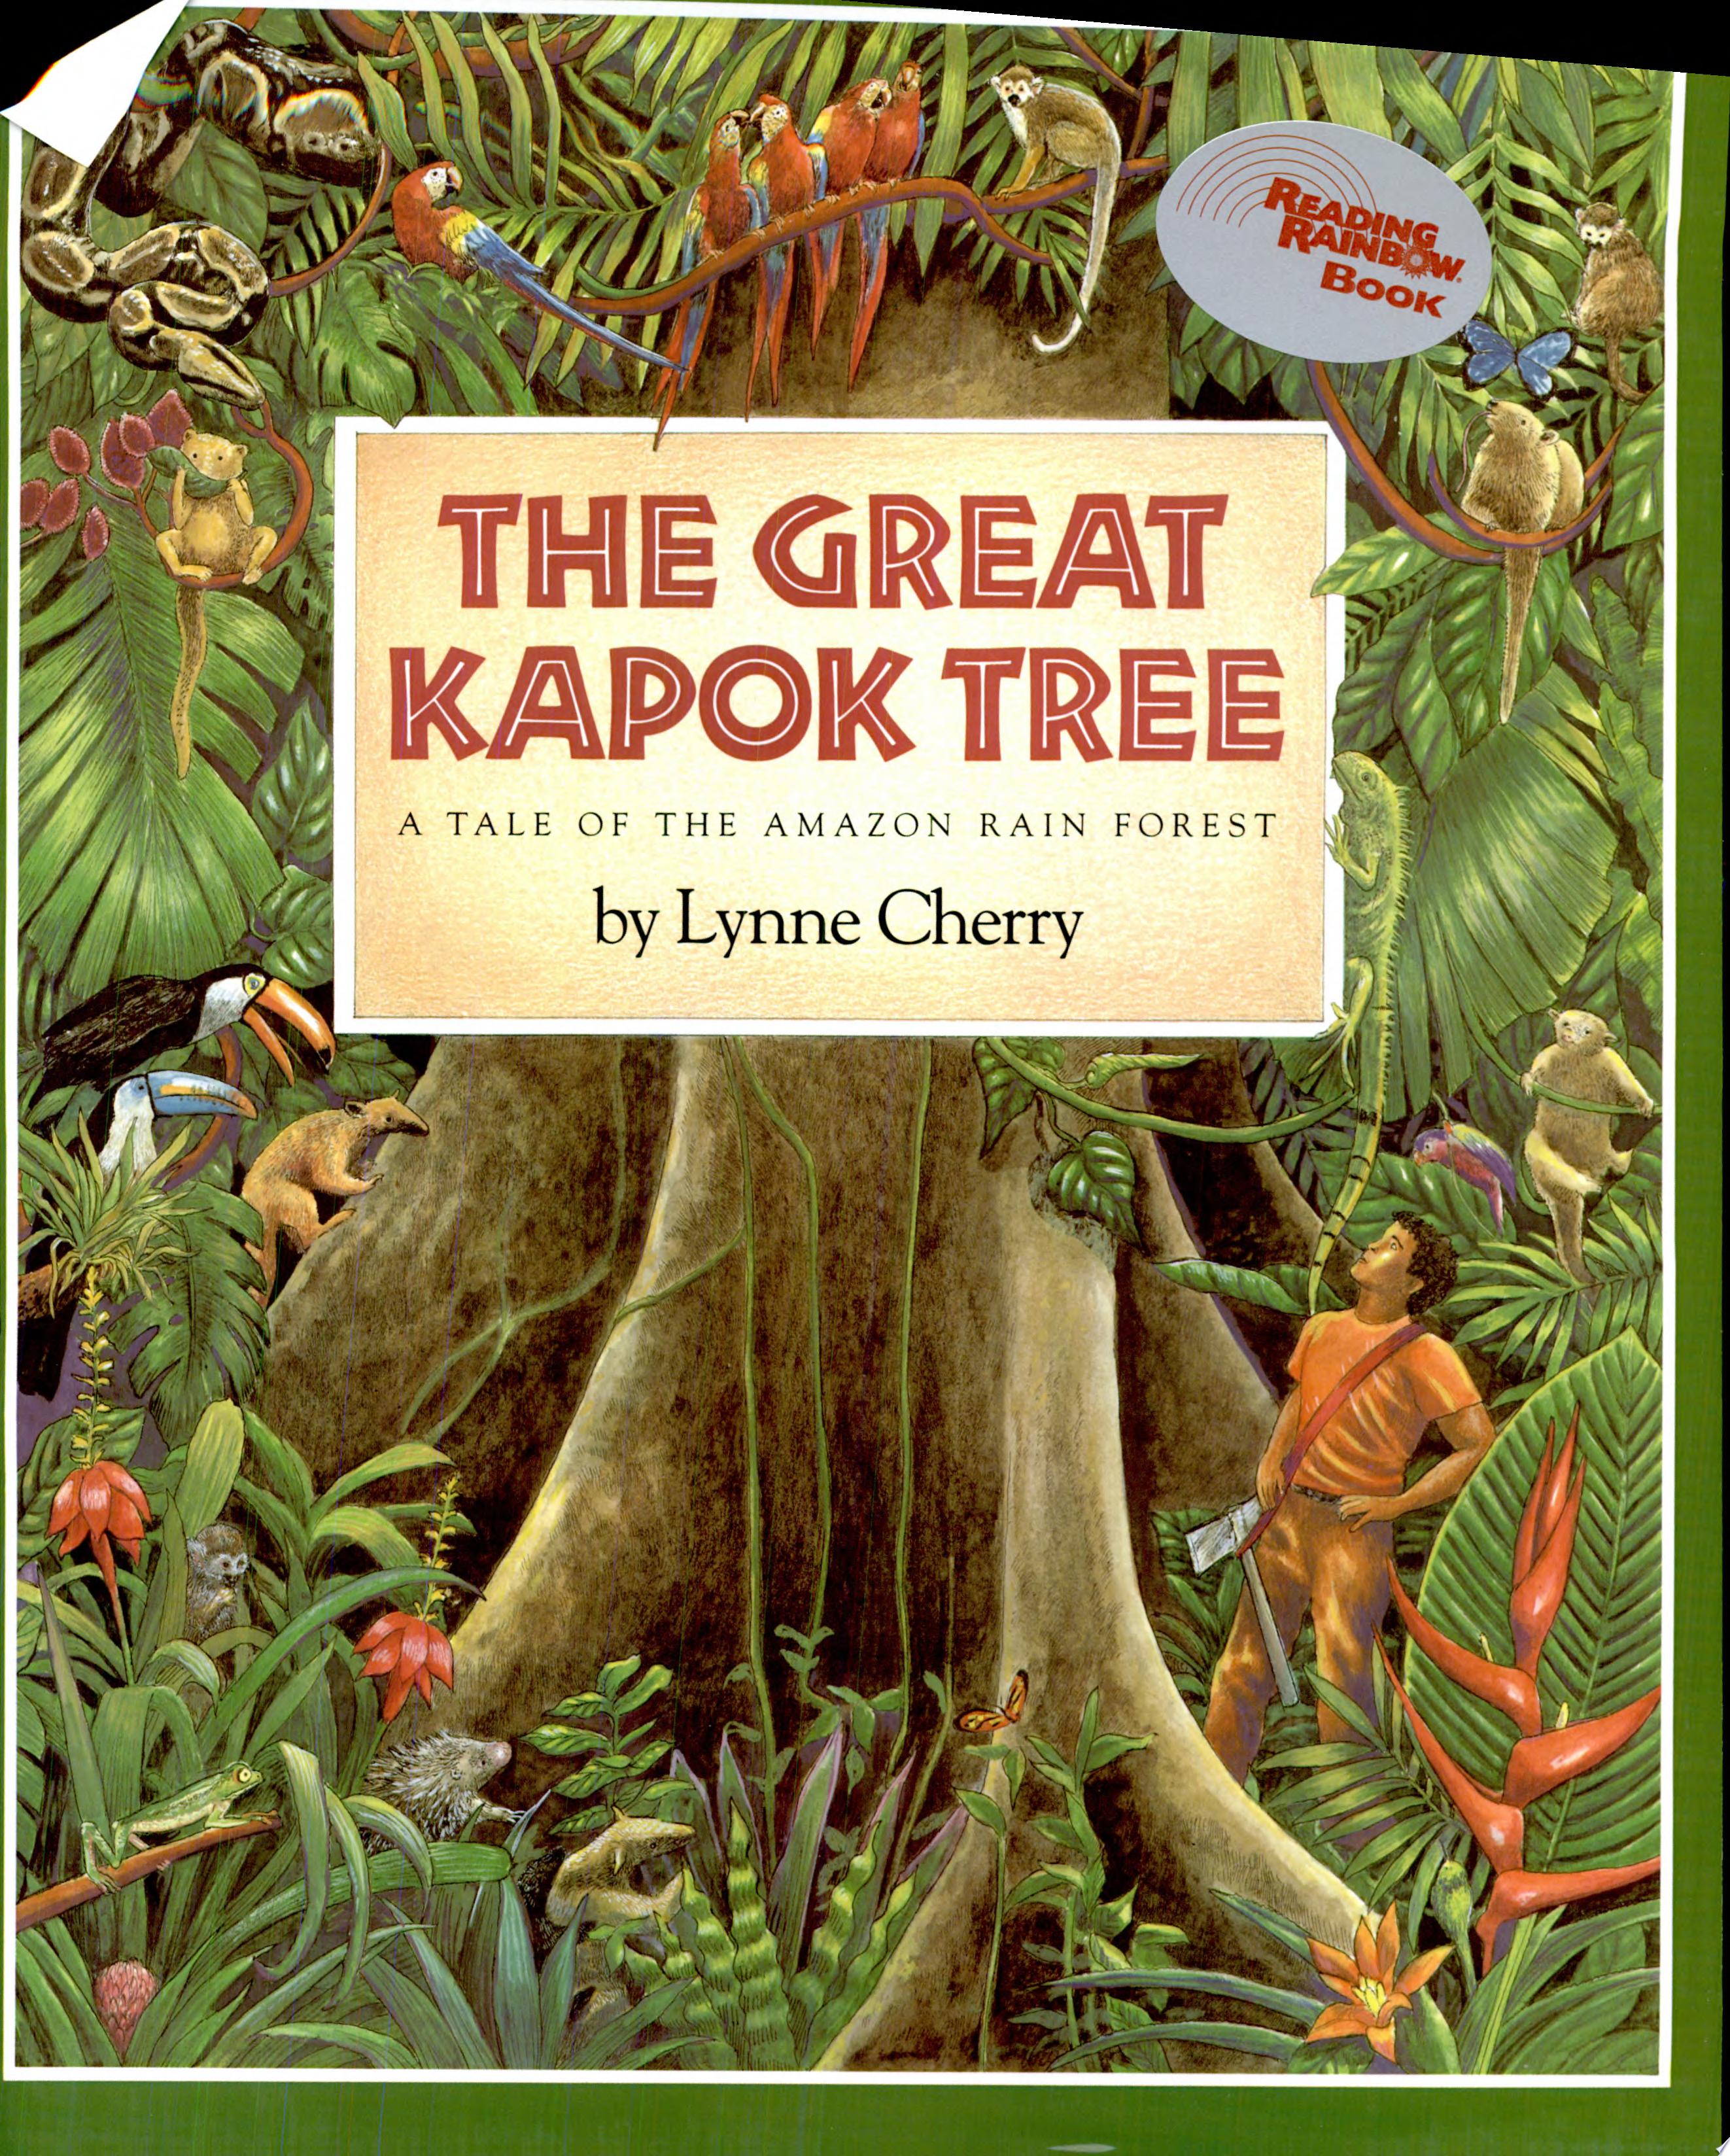 Image for "The Great Kapok Tree"